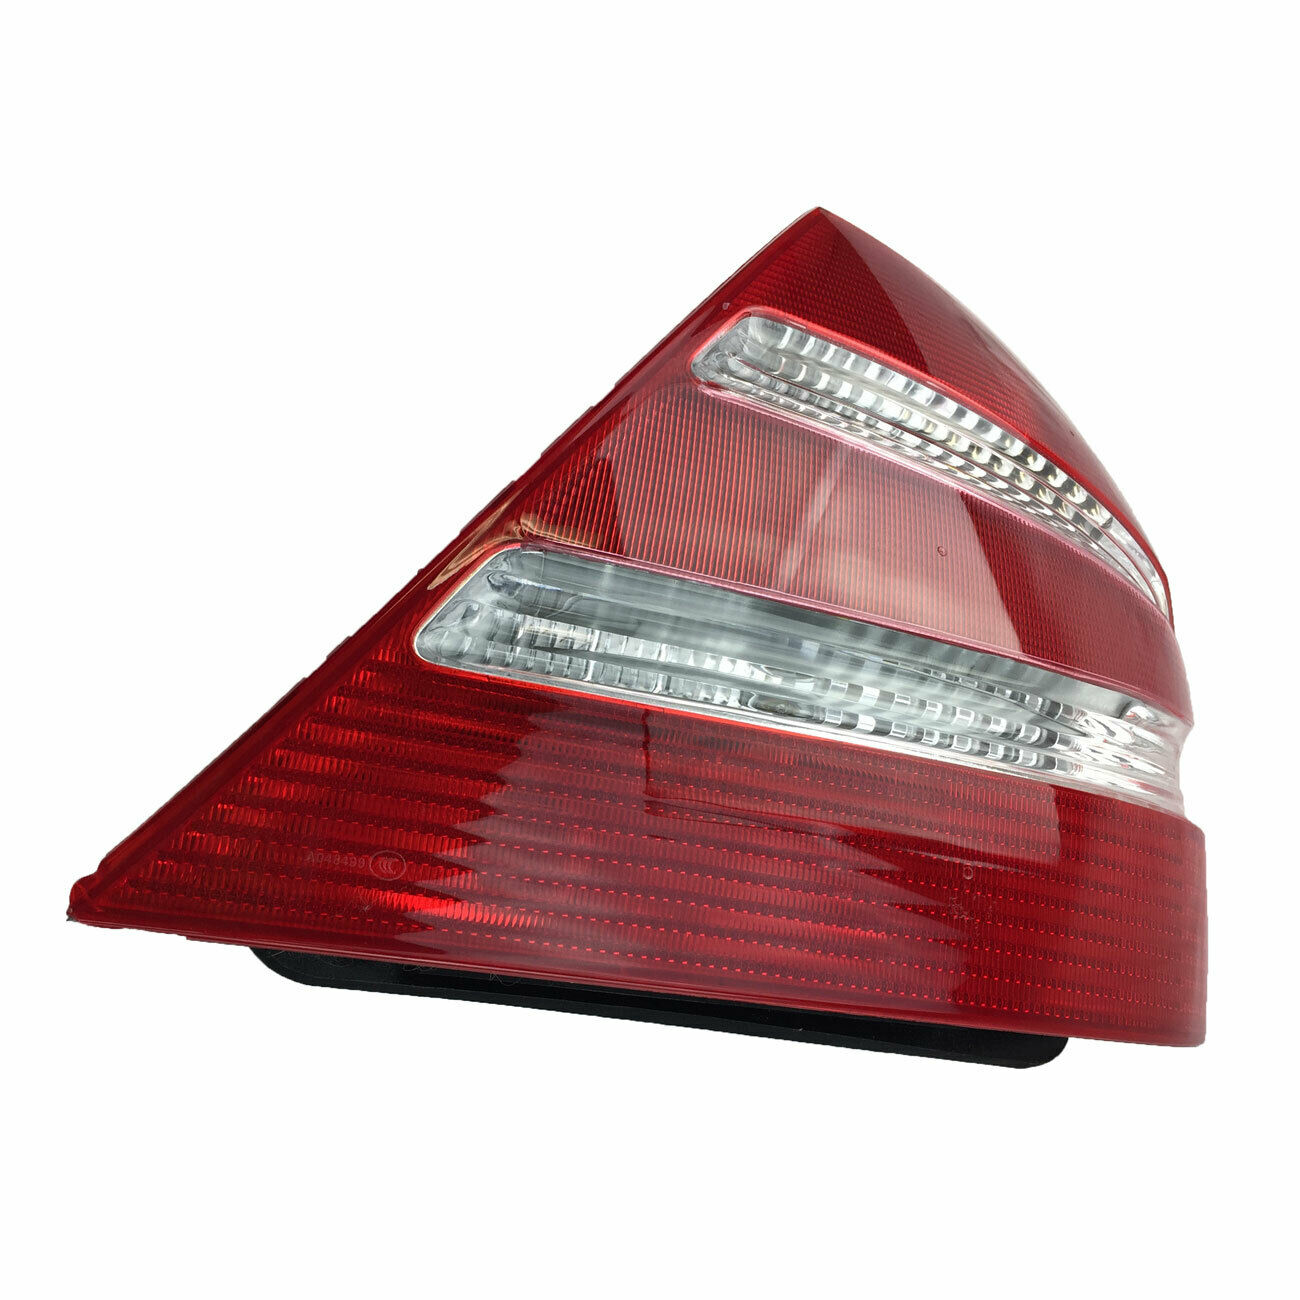 Right Tail Light Rear Lamp for Mercedes CLK C209 A209 02-10 (a little crack) German Made